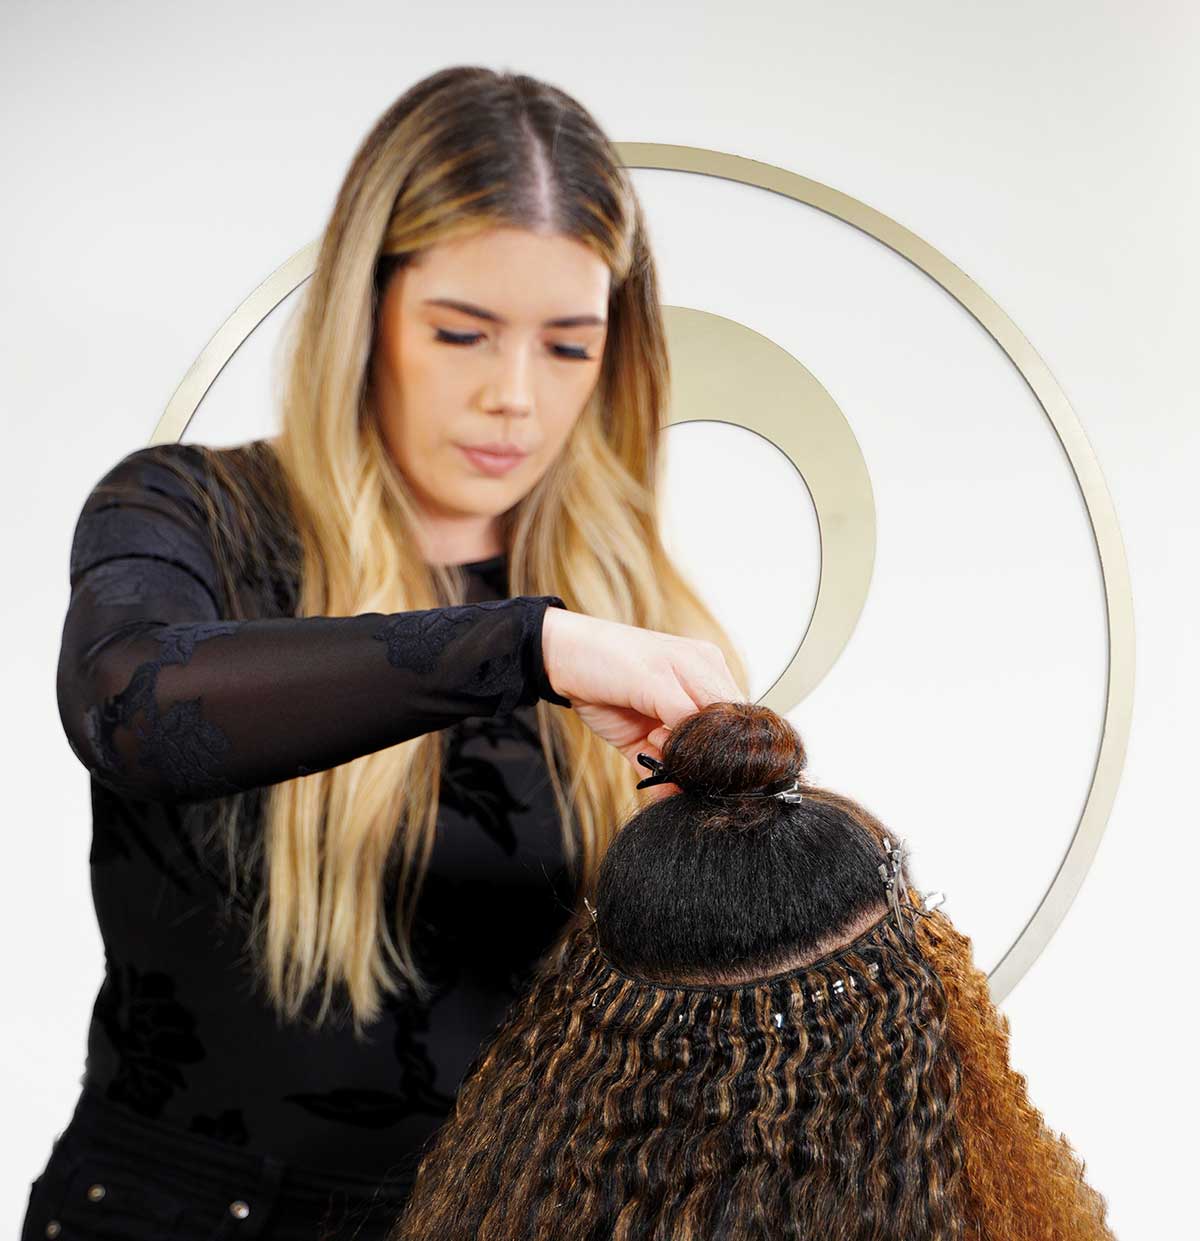 Hair Stylist Installing Weft Hair Extensions